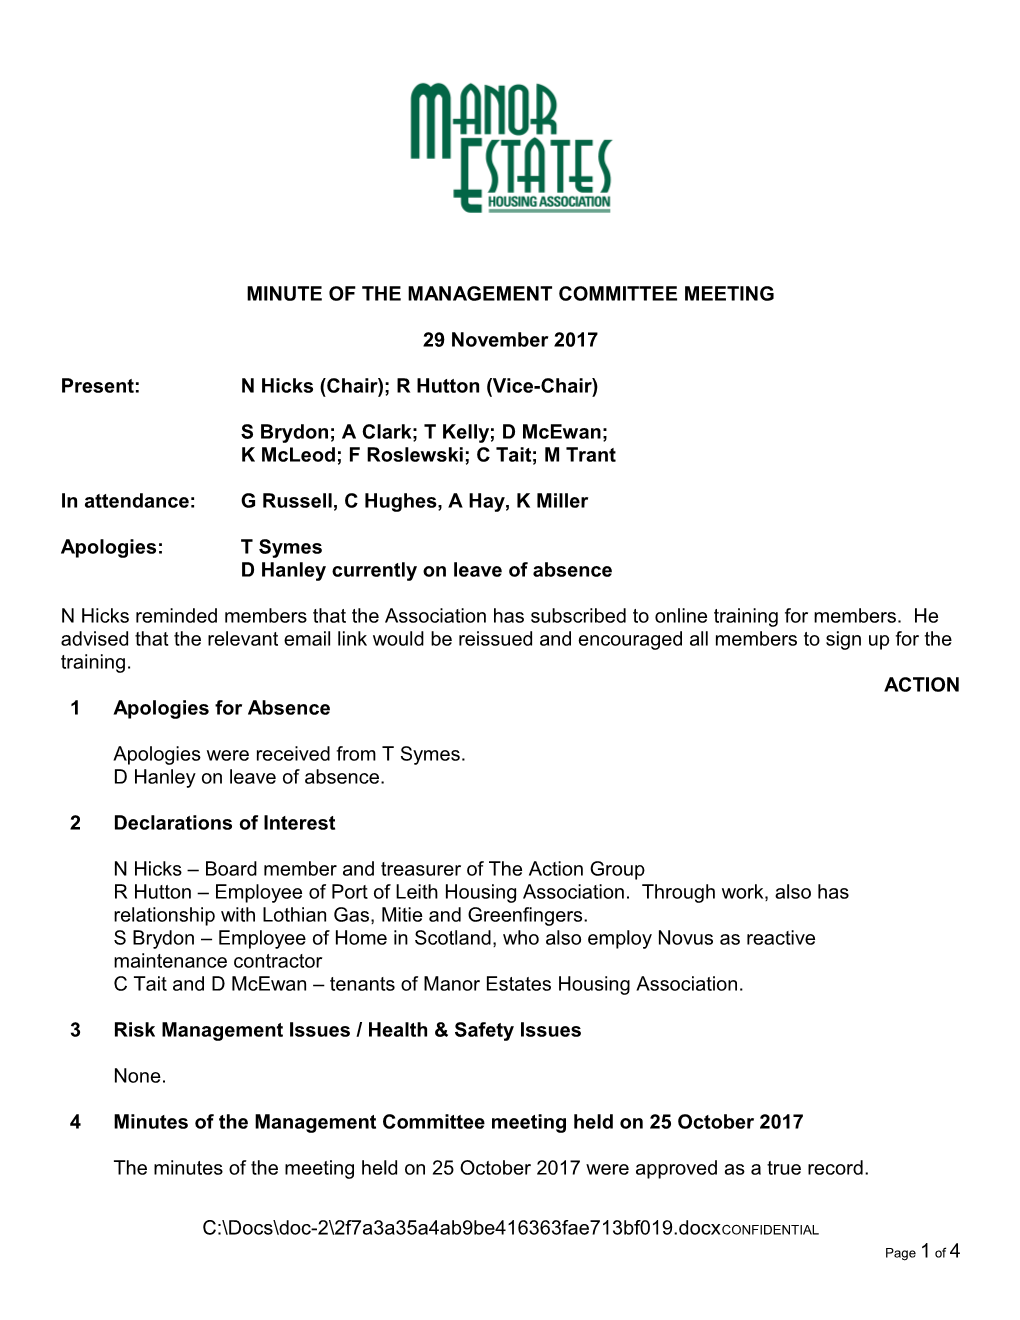 Minute of the Management Committee Meeting